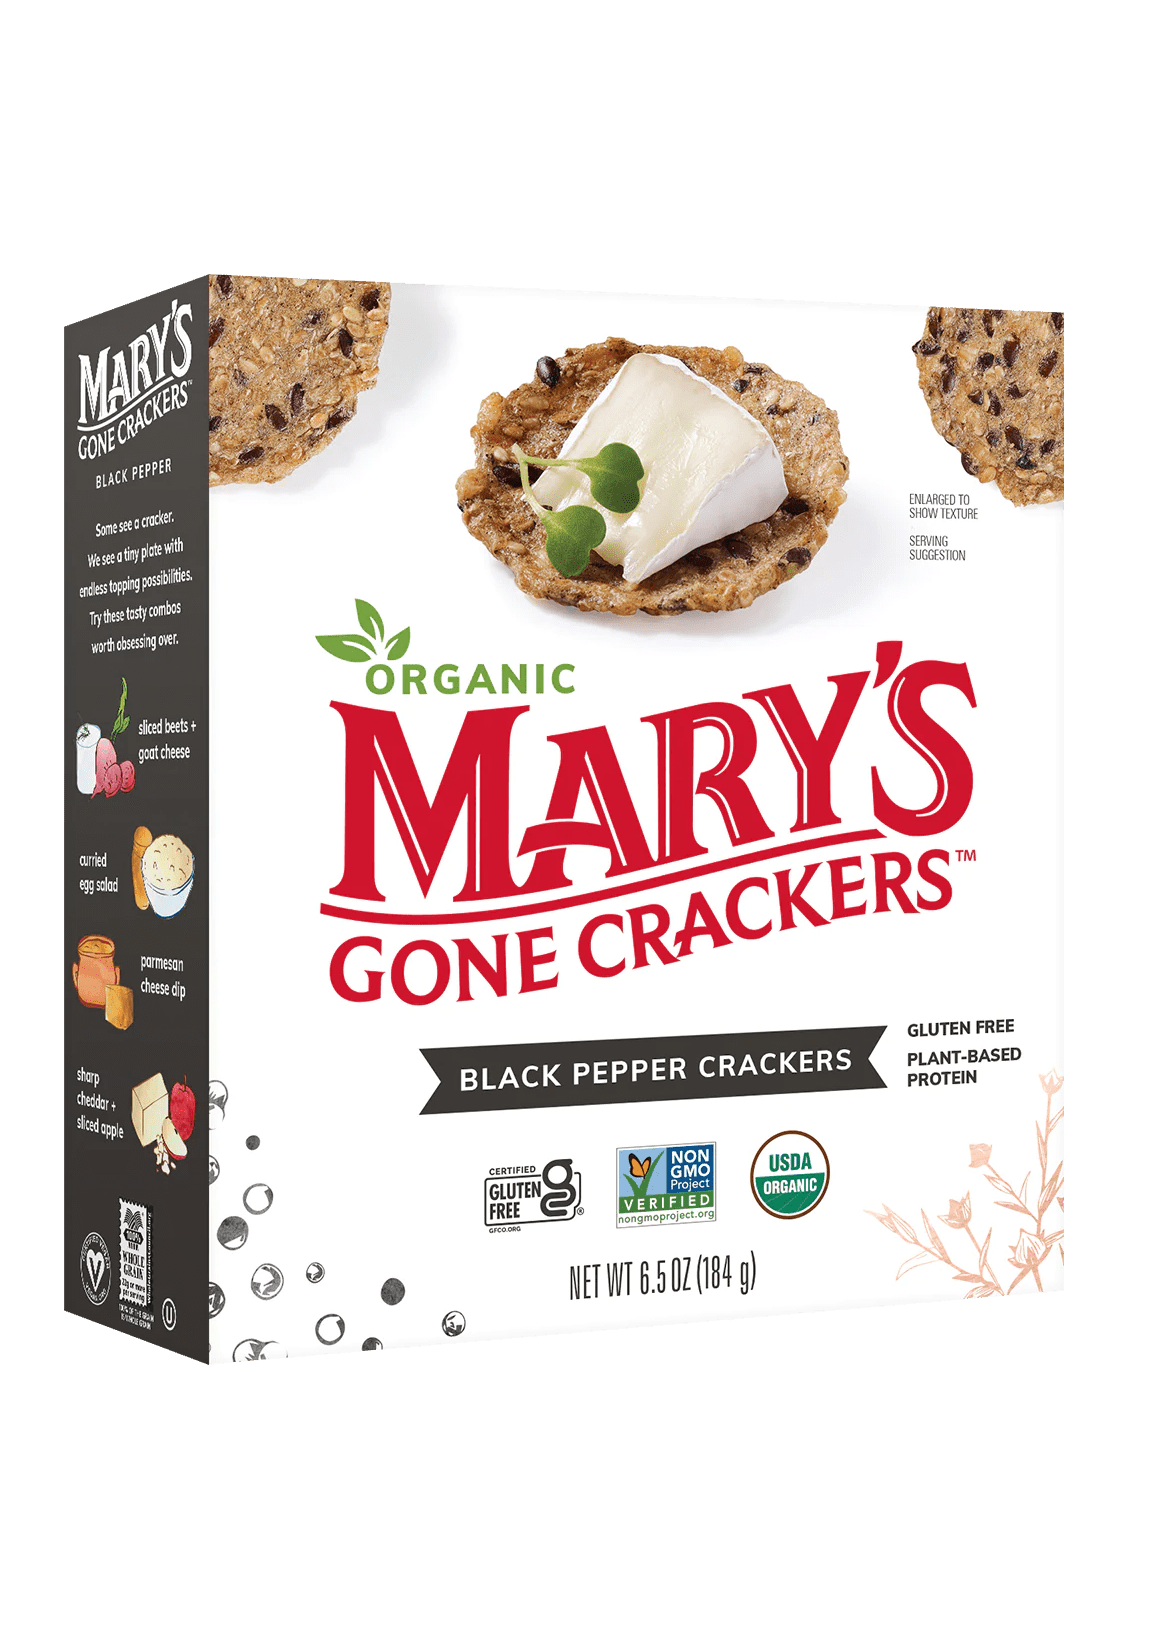 MARY'S GONE CRACKERS Black Pepper Crackers